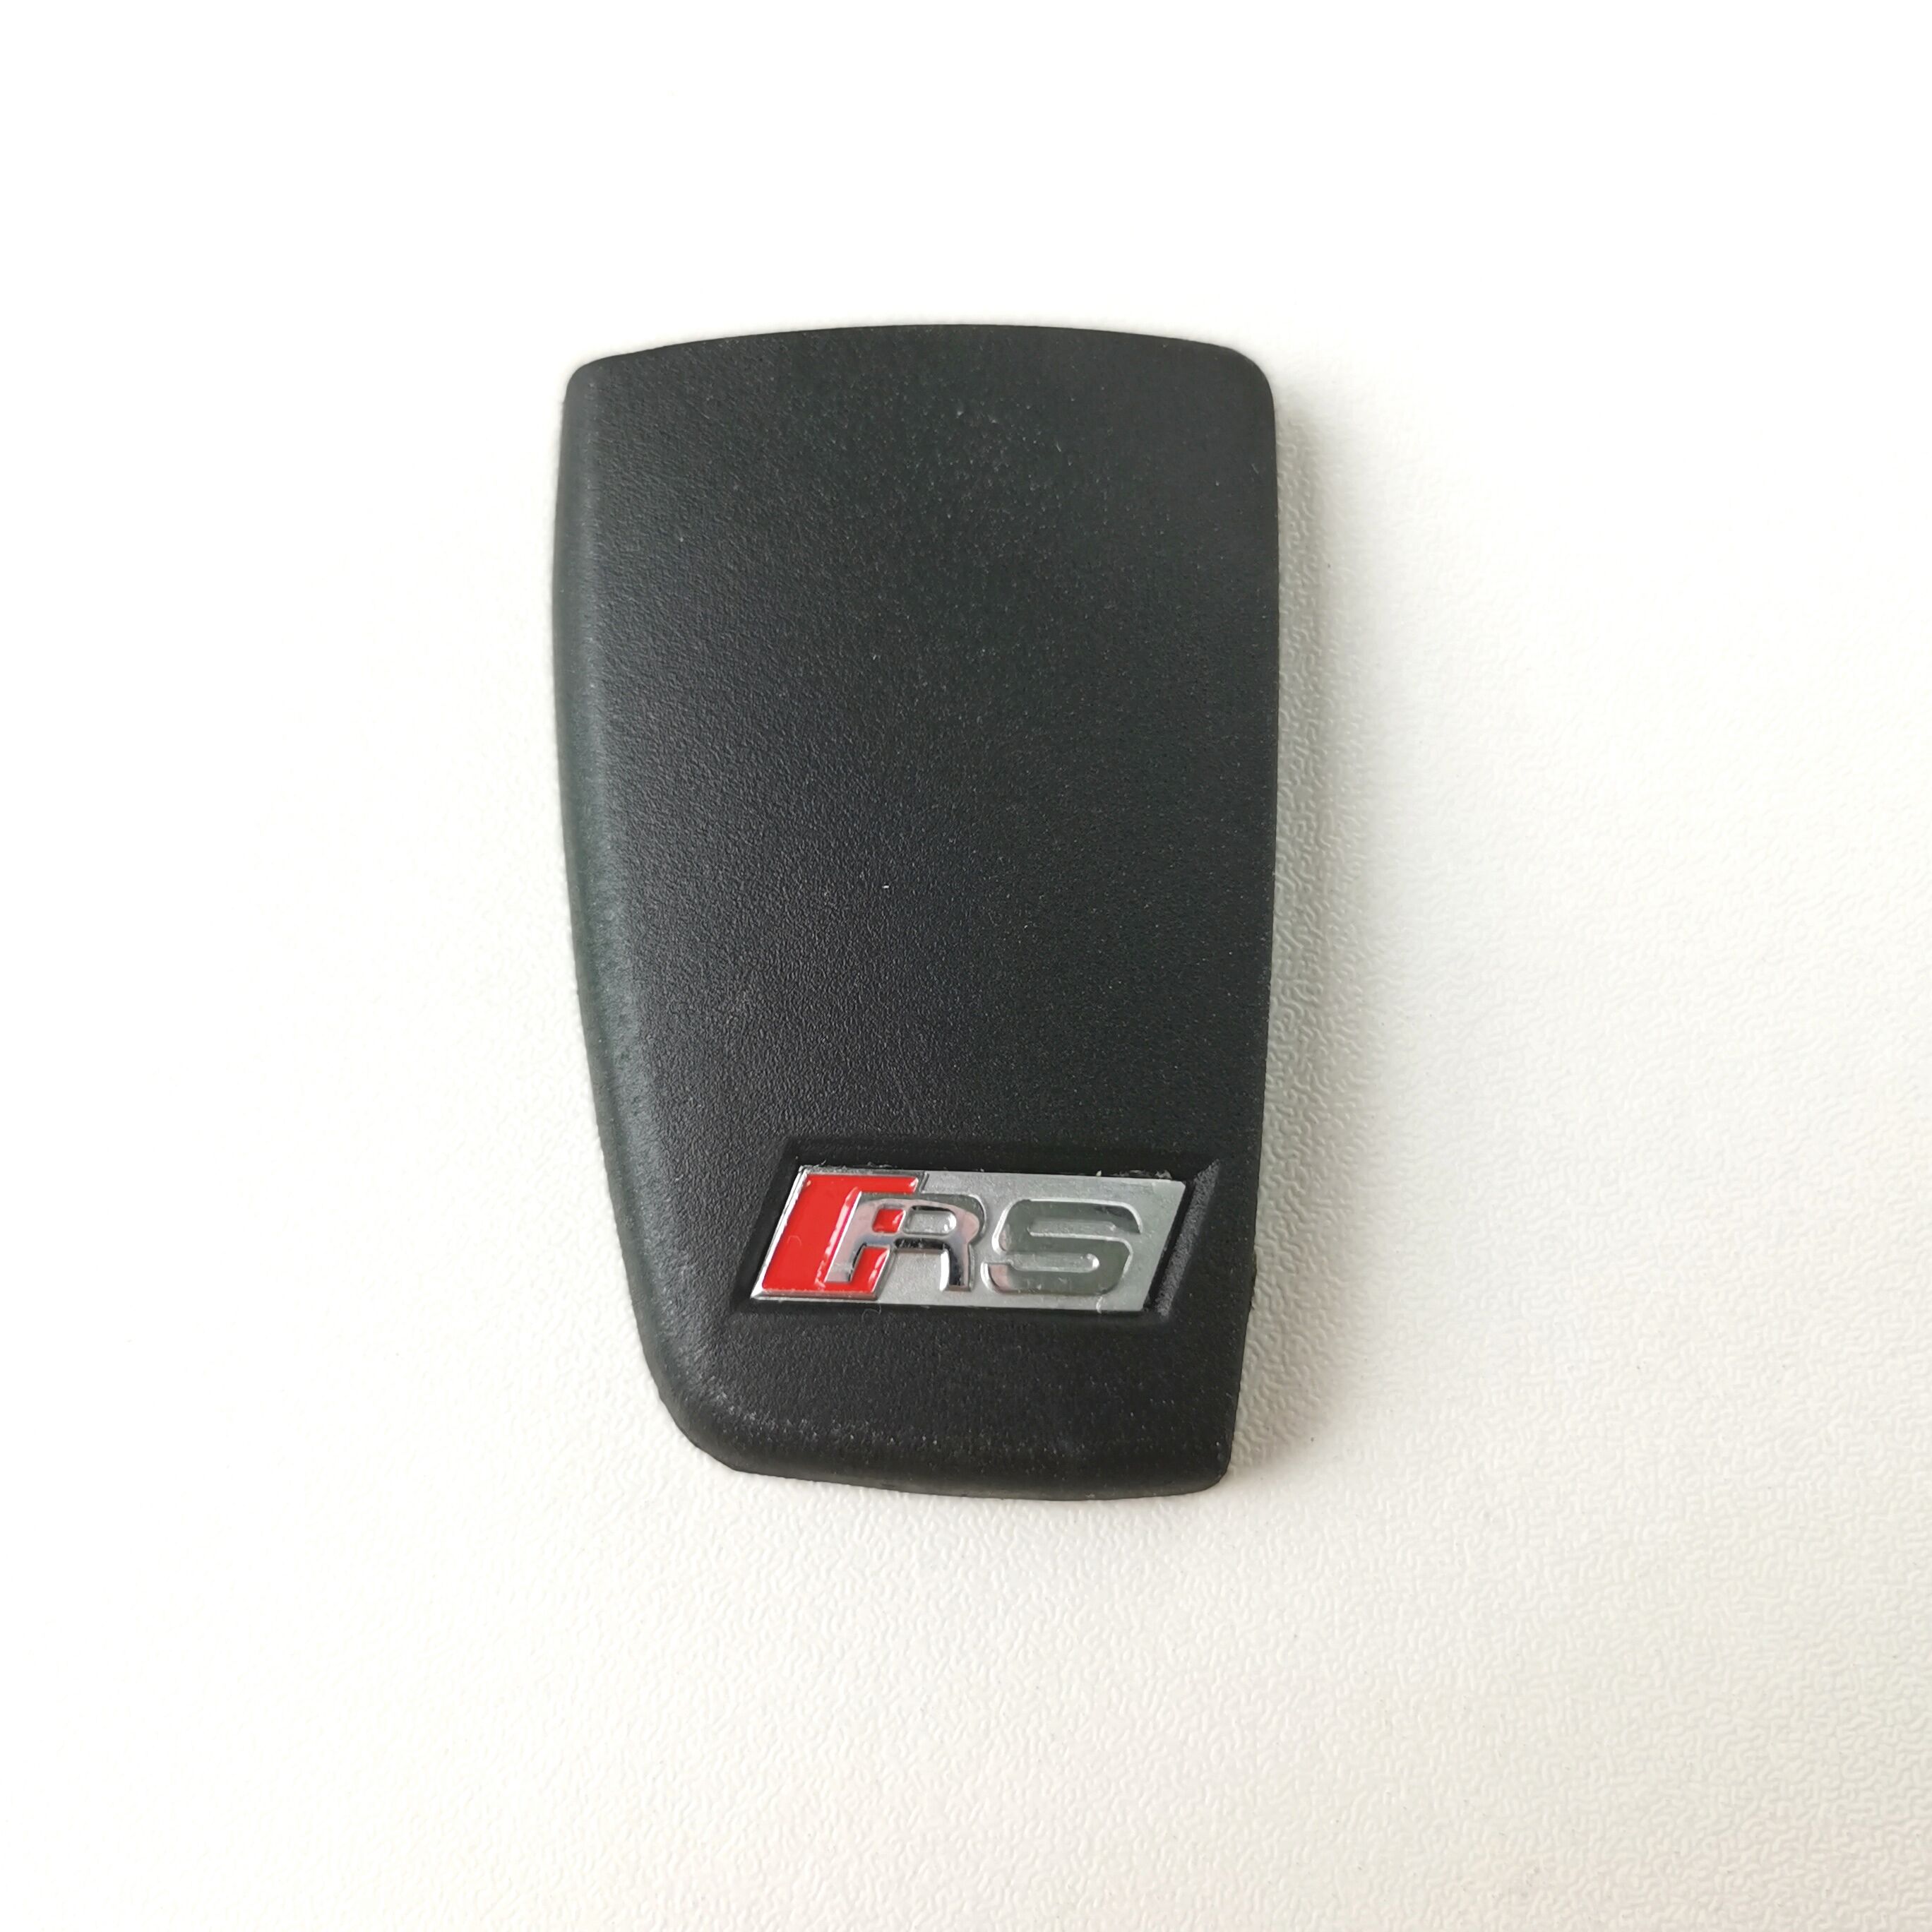 Suitable for Audi A3 Q3 A6L Q7 TT Key Shell S3 S6 RS Key Shell Back Cover Replacement RS B Type